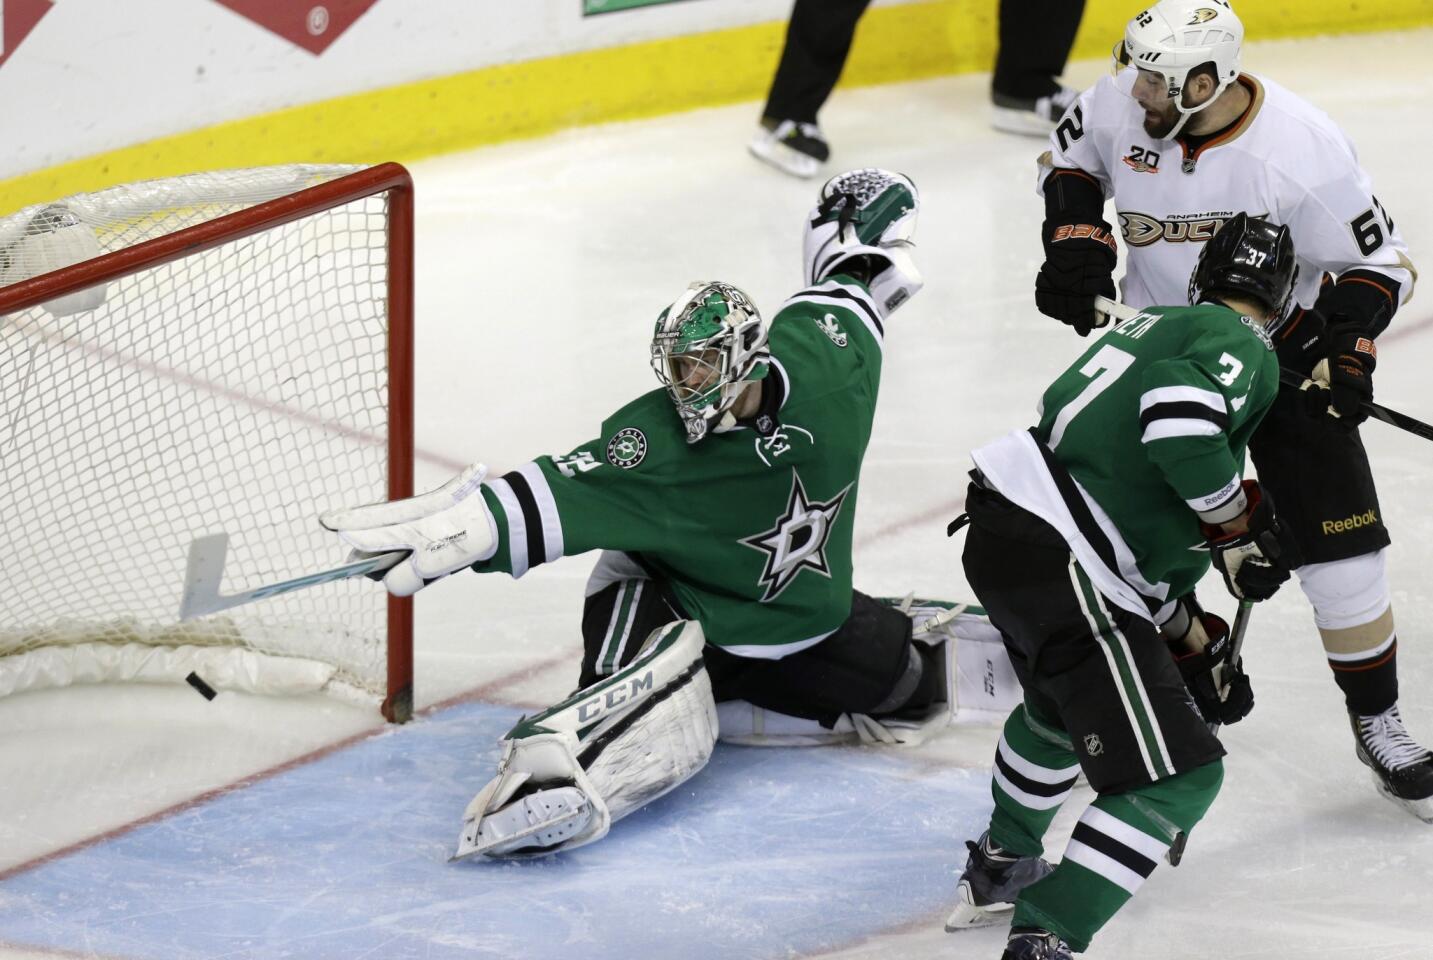 Dallas Stars goalie Kari Lehtonen gives up the winning goal on a shot by Ducks forward Nick Bonino (not shown) as Ducks forward Patrick Maroon looks on in the team's 5-4 series-clinching victory in Game 6 of the Western Conference quarterfinals.